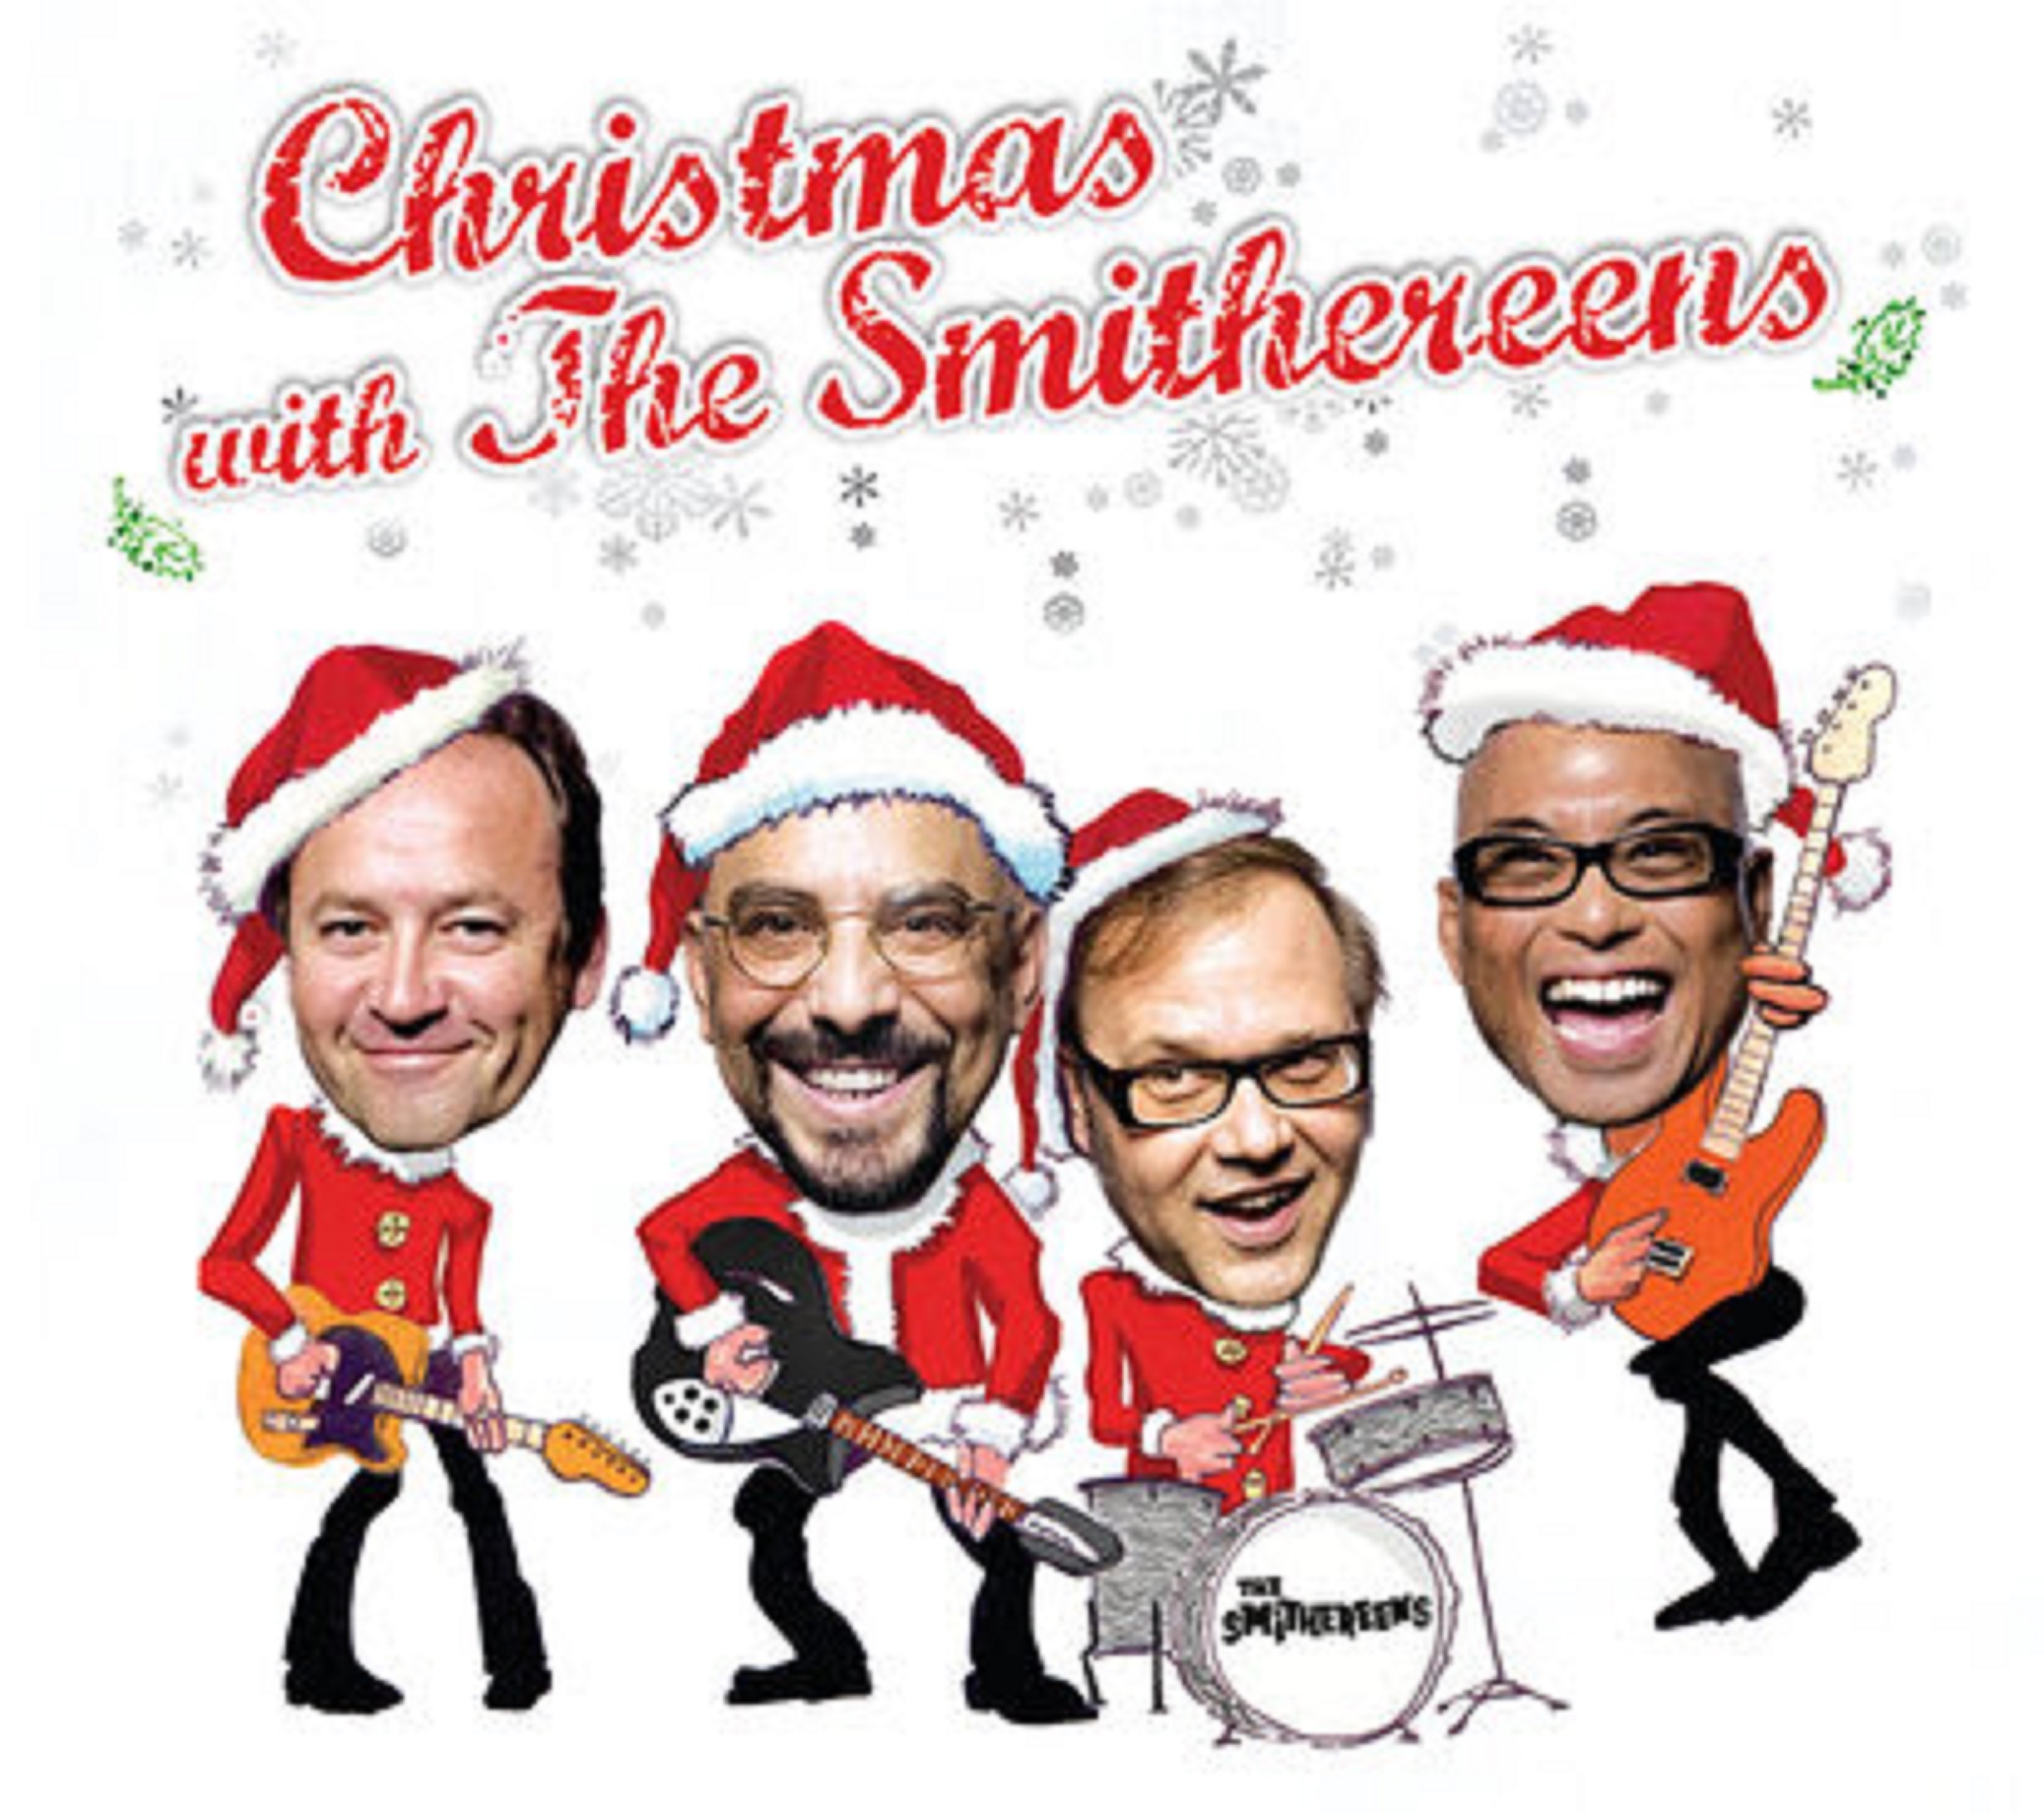 The Smithereens announce limited edition green vinyl Xmas album out 11/18/22